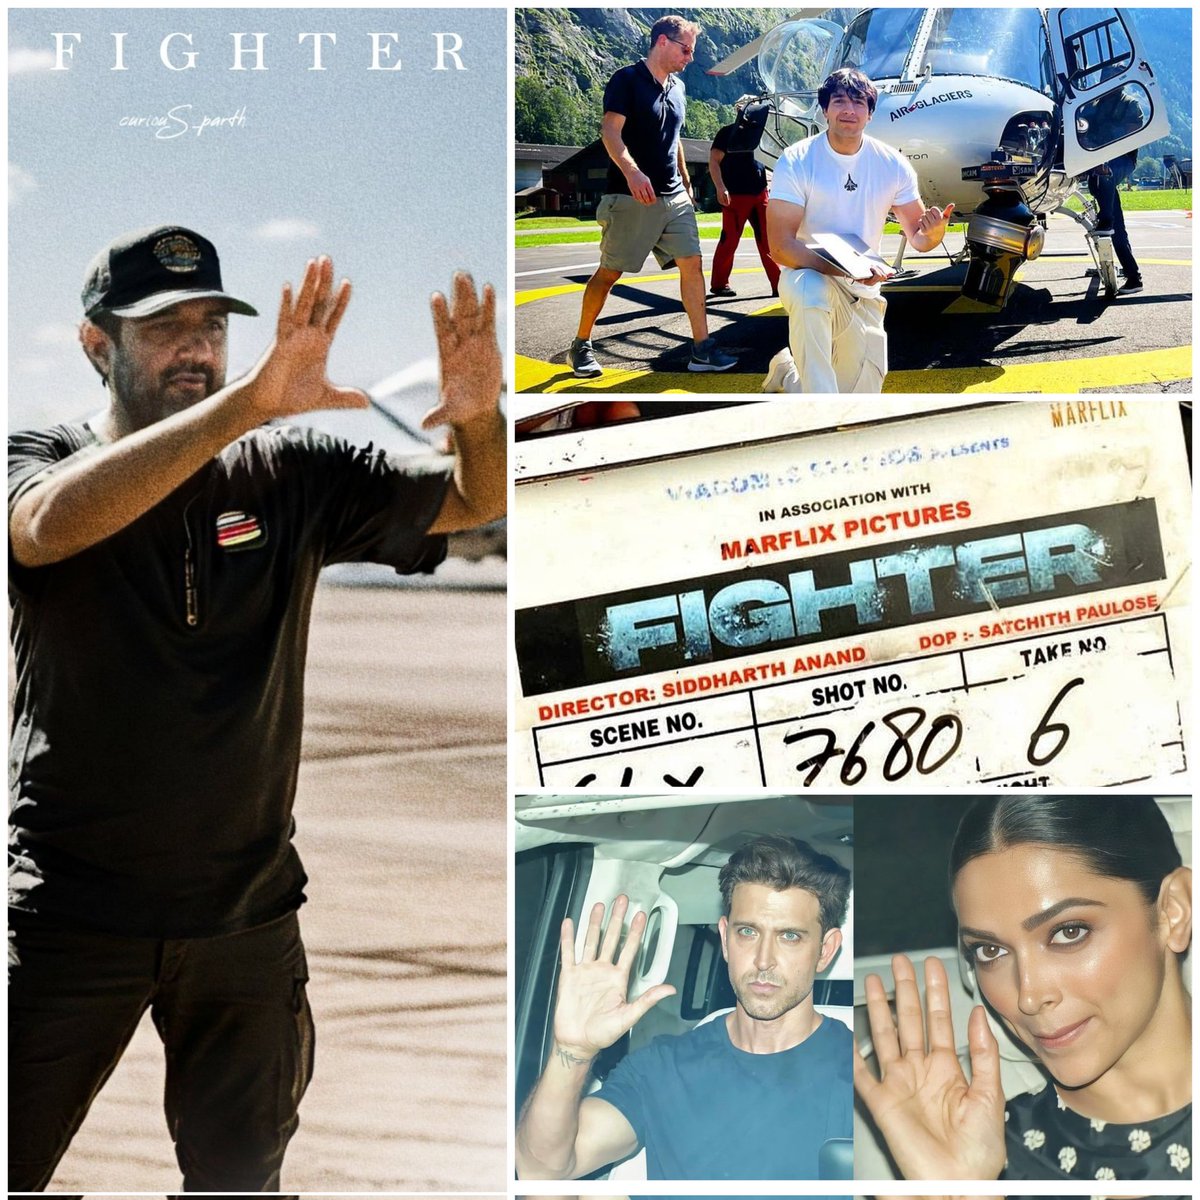 Exclusive
#HrithikRoshan and #DeepikaPadukone are shooting for a very big song of #Fighter in Switzerland, this shoot happening till next Sunday, #VishalShekhar is also present for giving Music